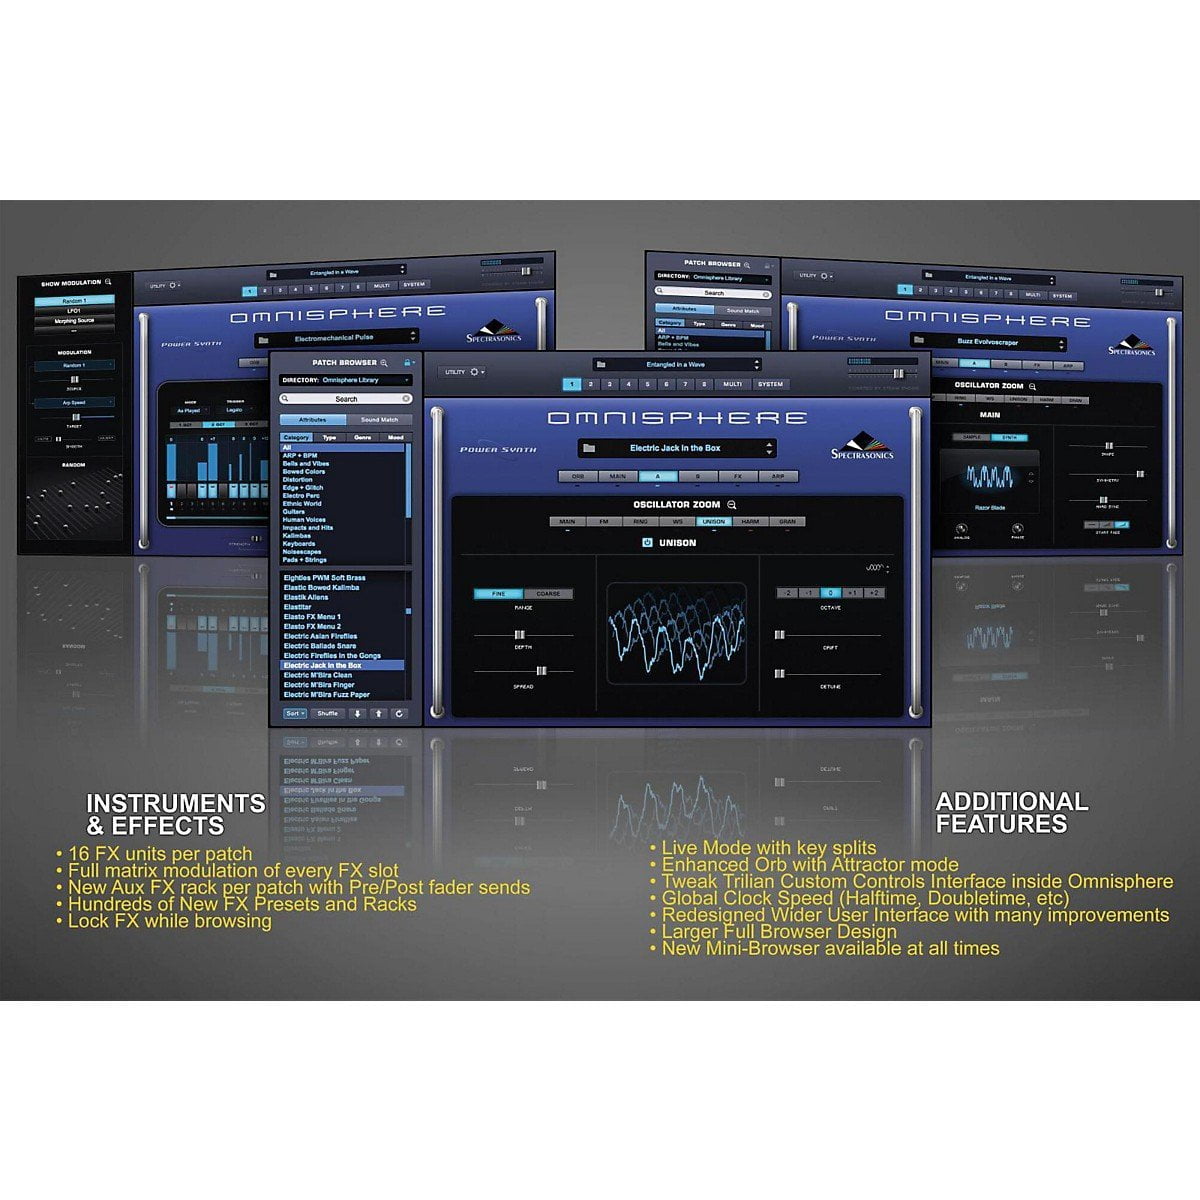 spectrasonics try refreshing the soundsource browser